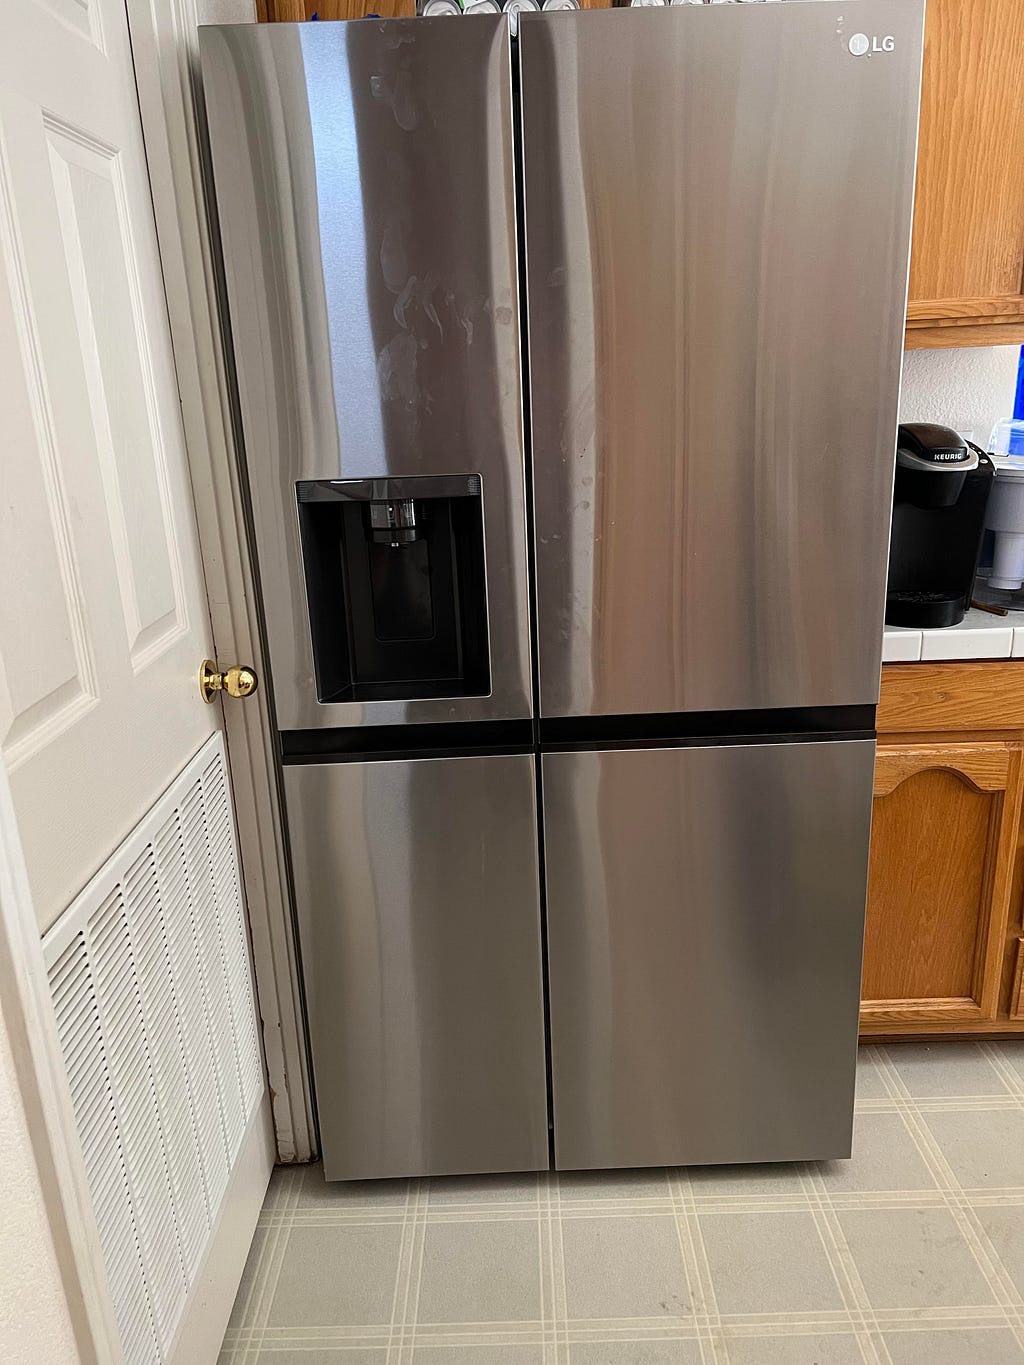 picture of a stainless steel refrigerator, with side-by-side doors, and a water and ice dispenser on the front of the left-hand door